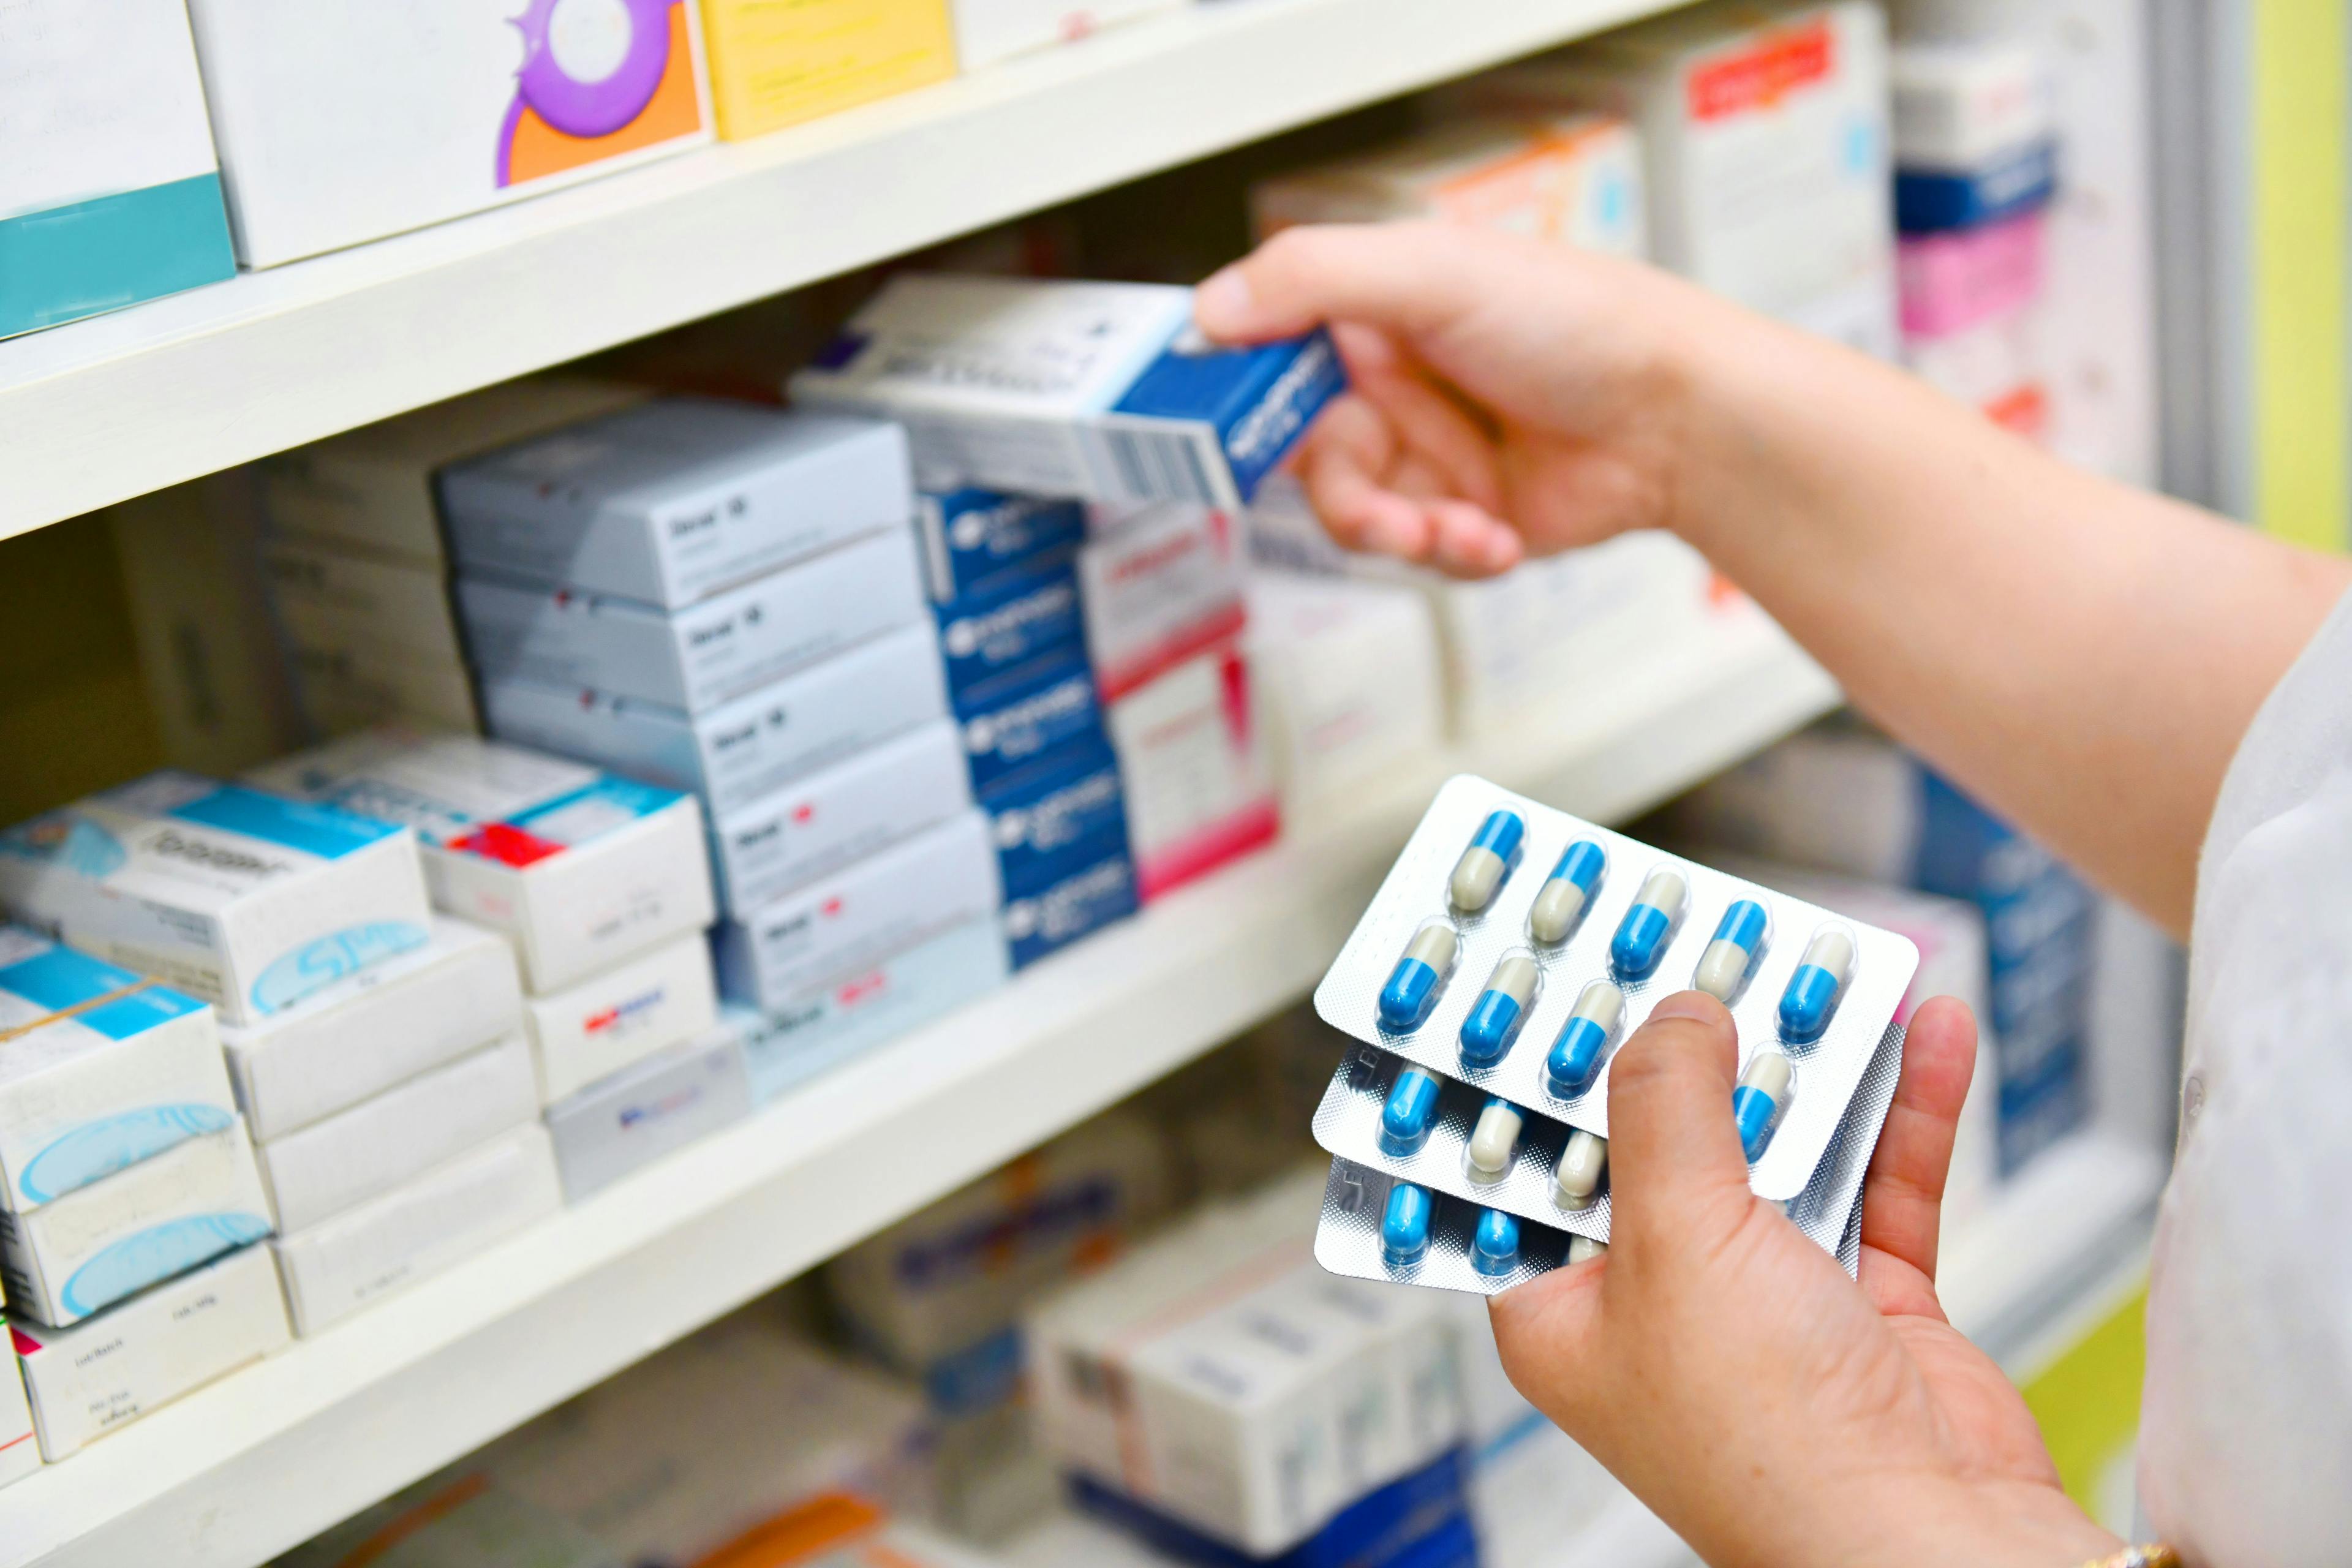 Enhancing Patient Care With Medication Safety, Convenience Through Delivery Services